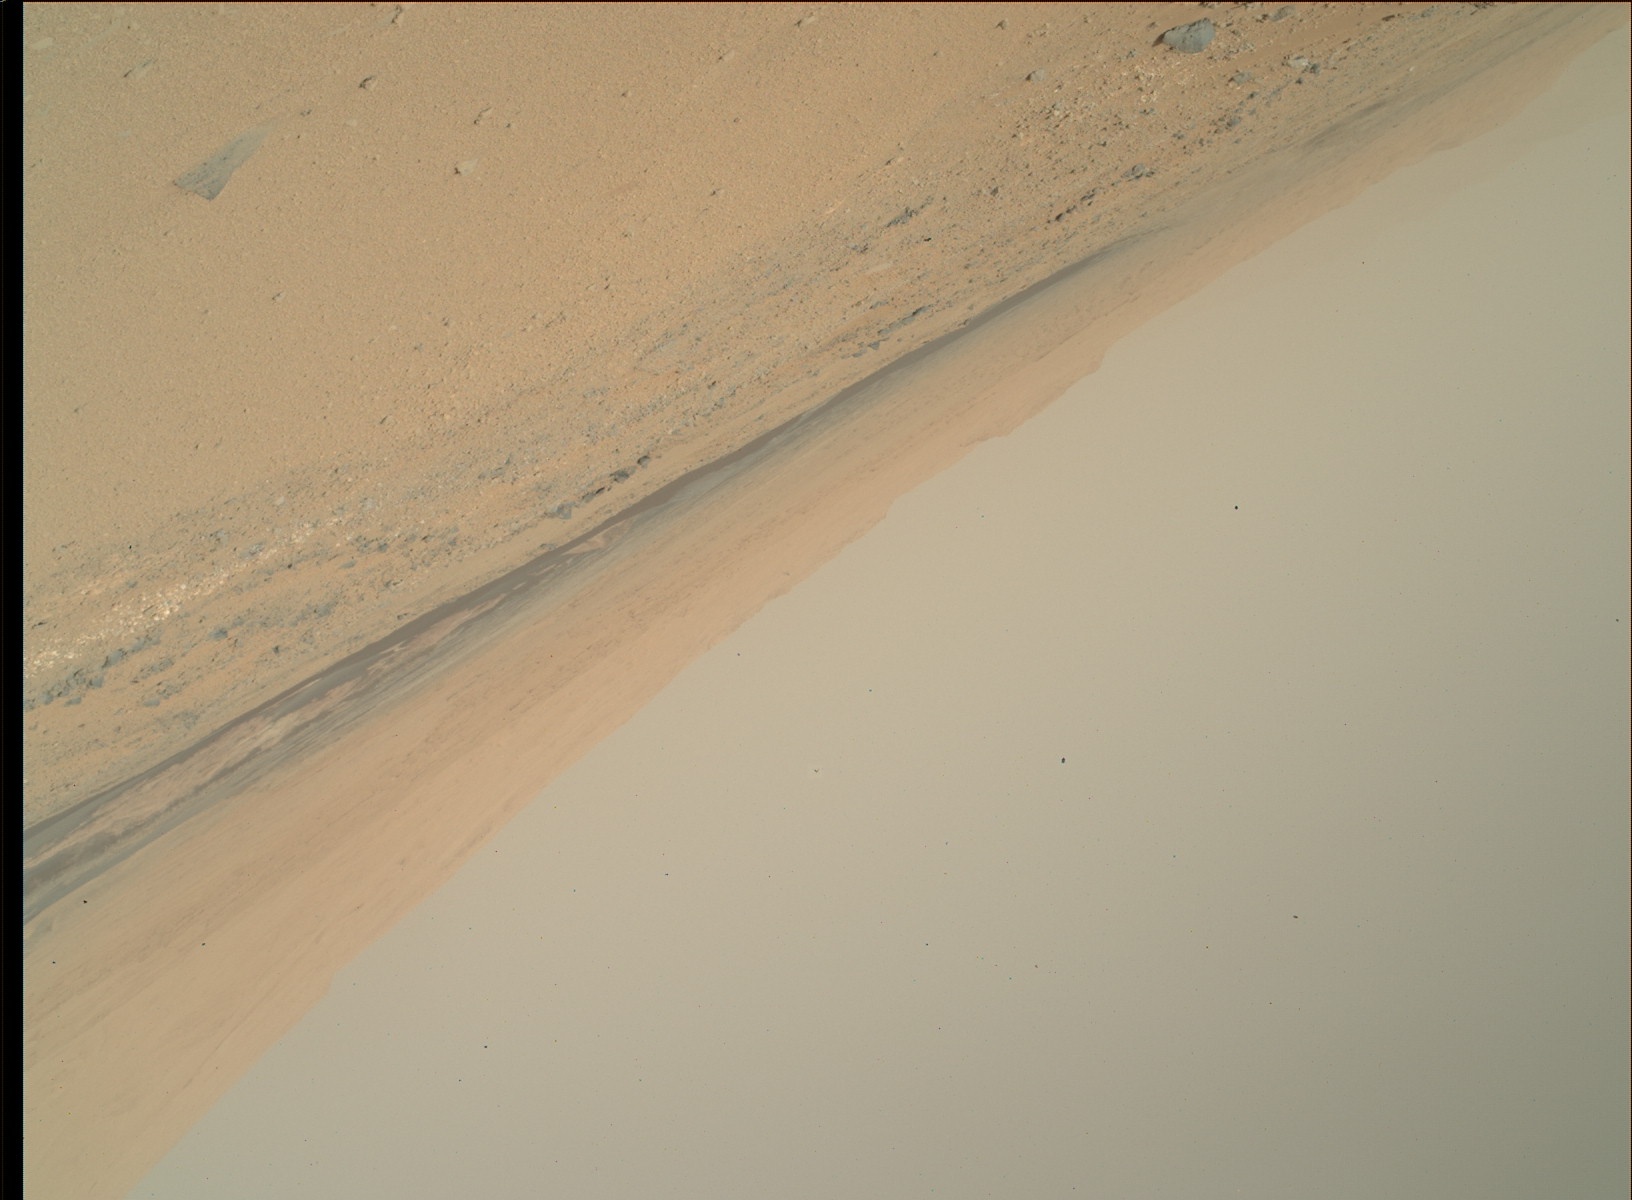 Nasa's Mars rover Curiosity acquired this image using its Mars Hand Lens Imager (MAHLI) on Sol 430